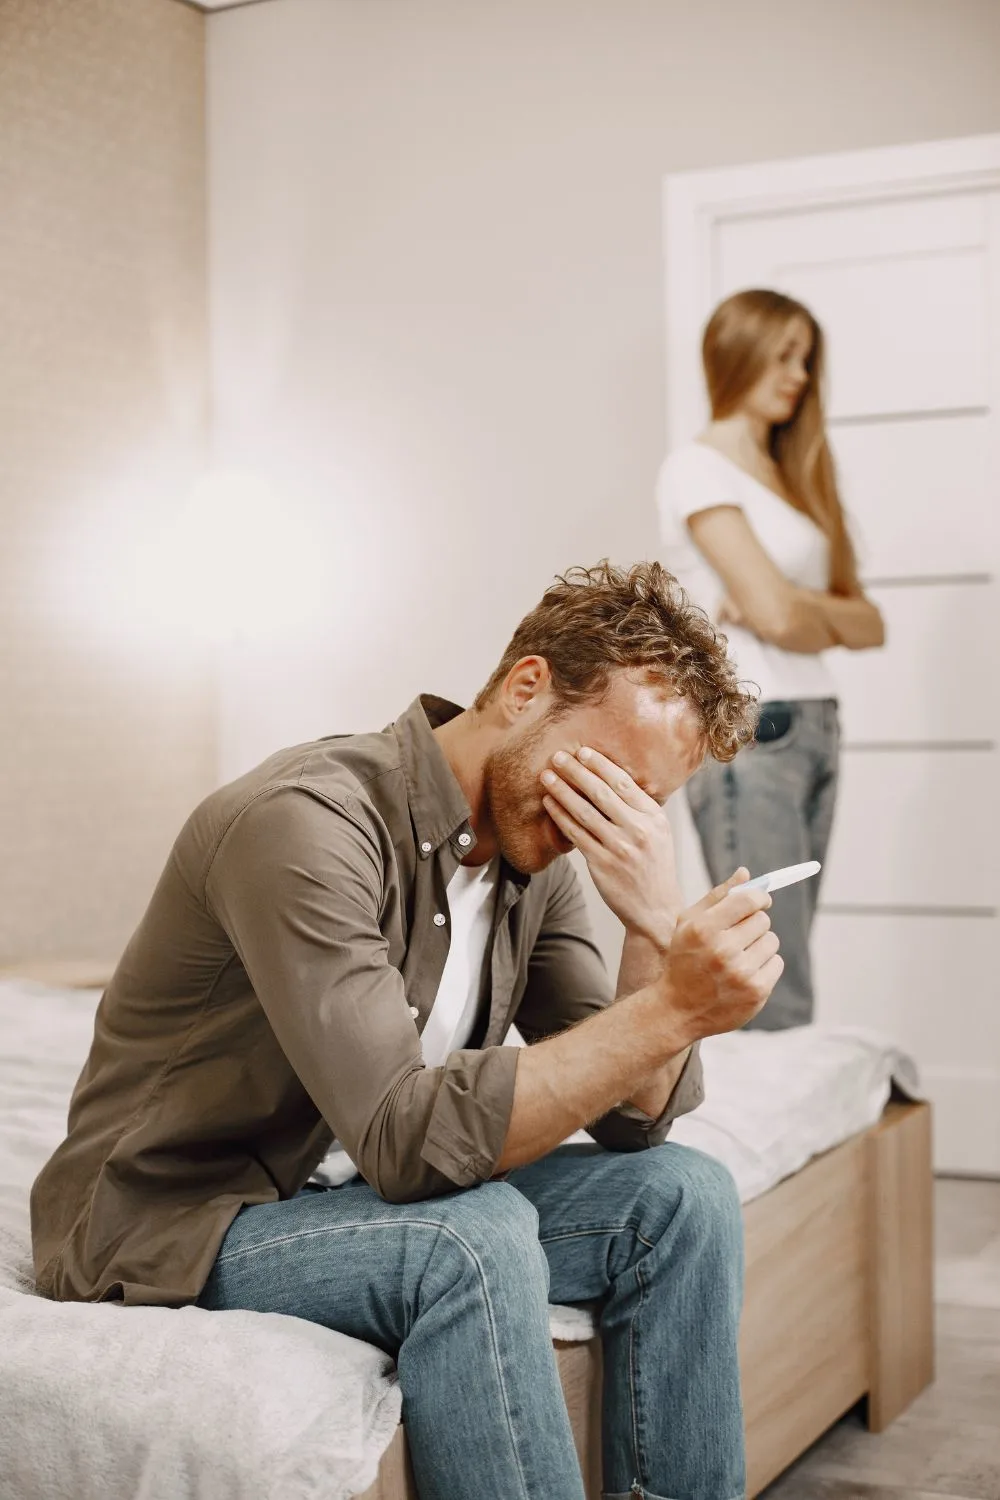 Signs Of An Unsupportive Husband During Pregnancy